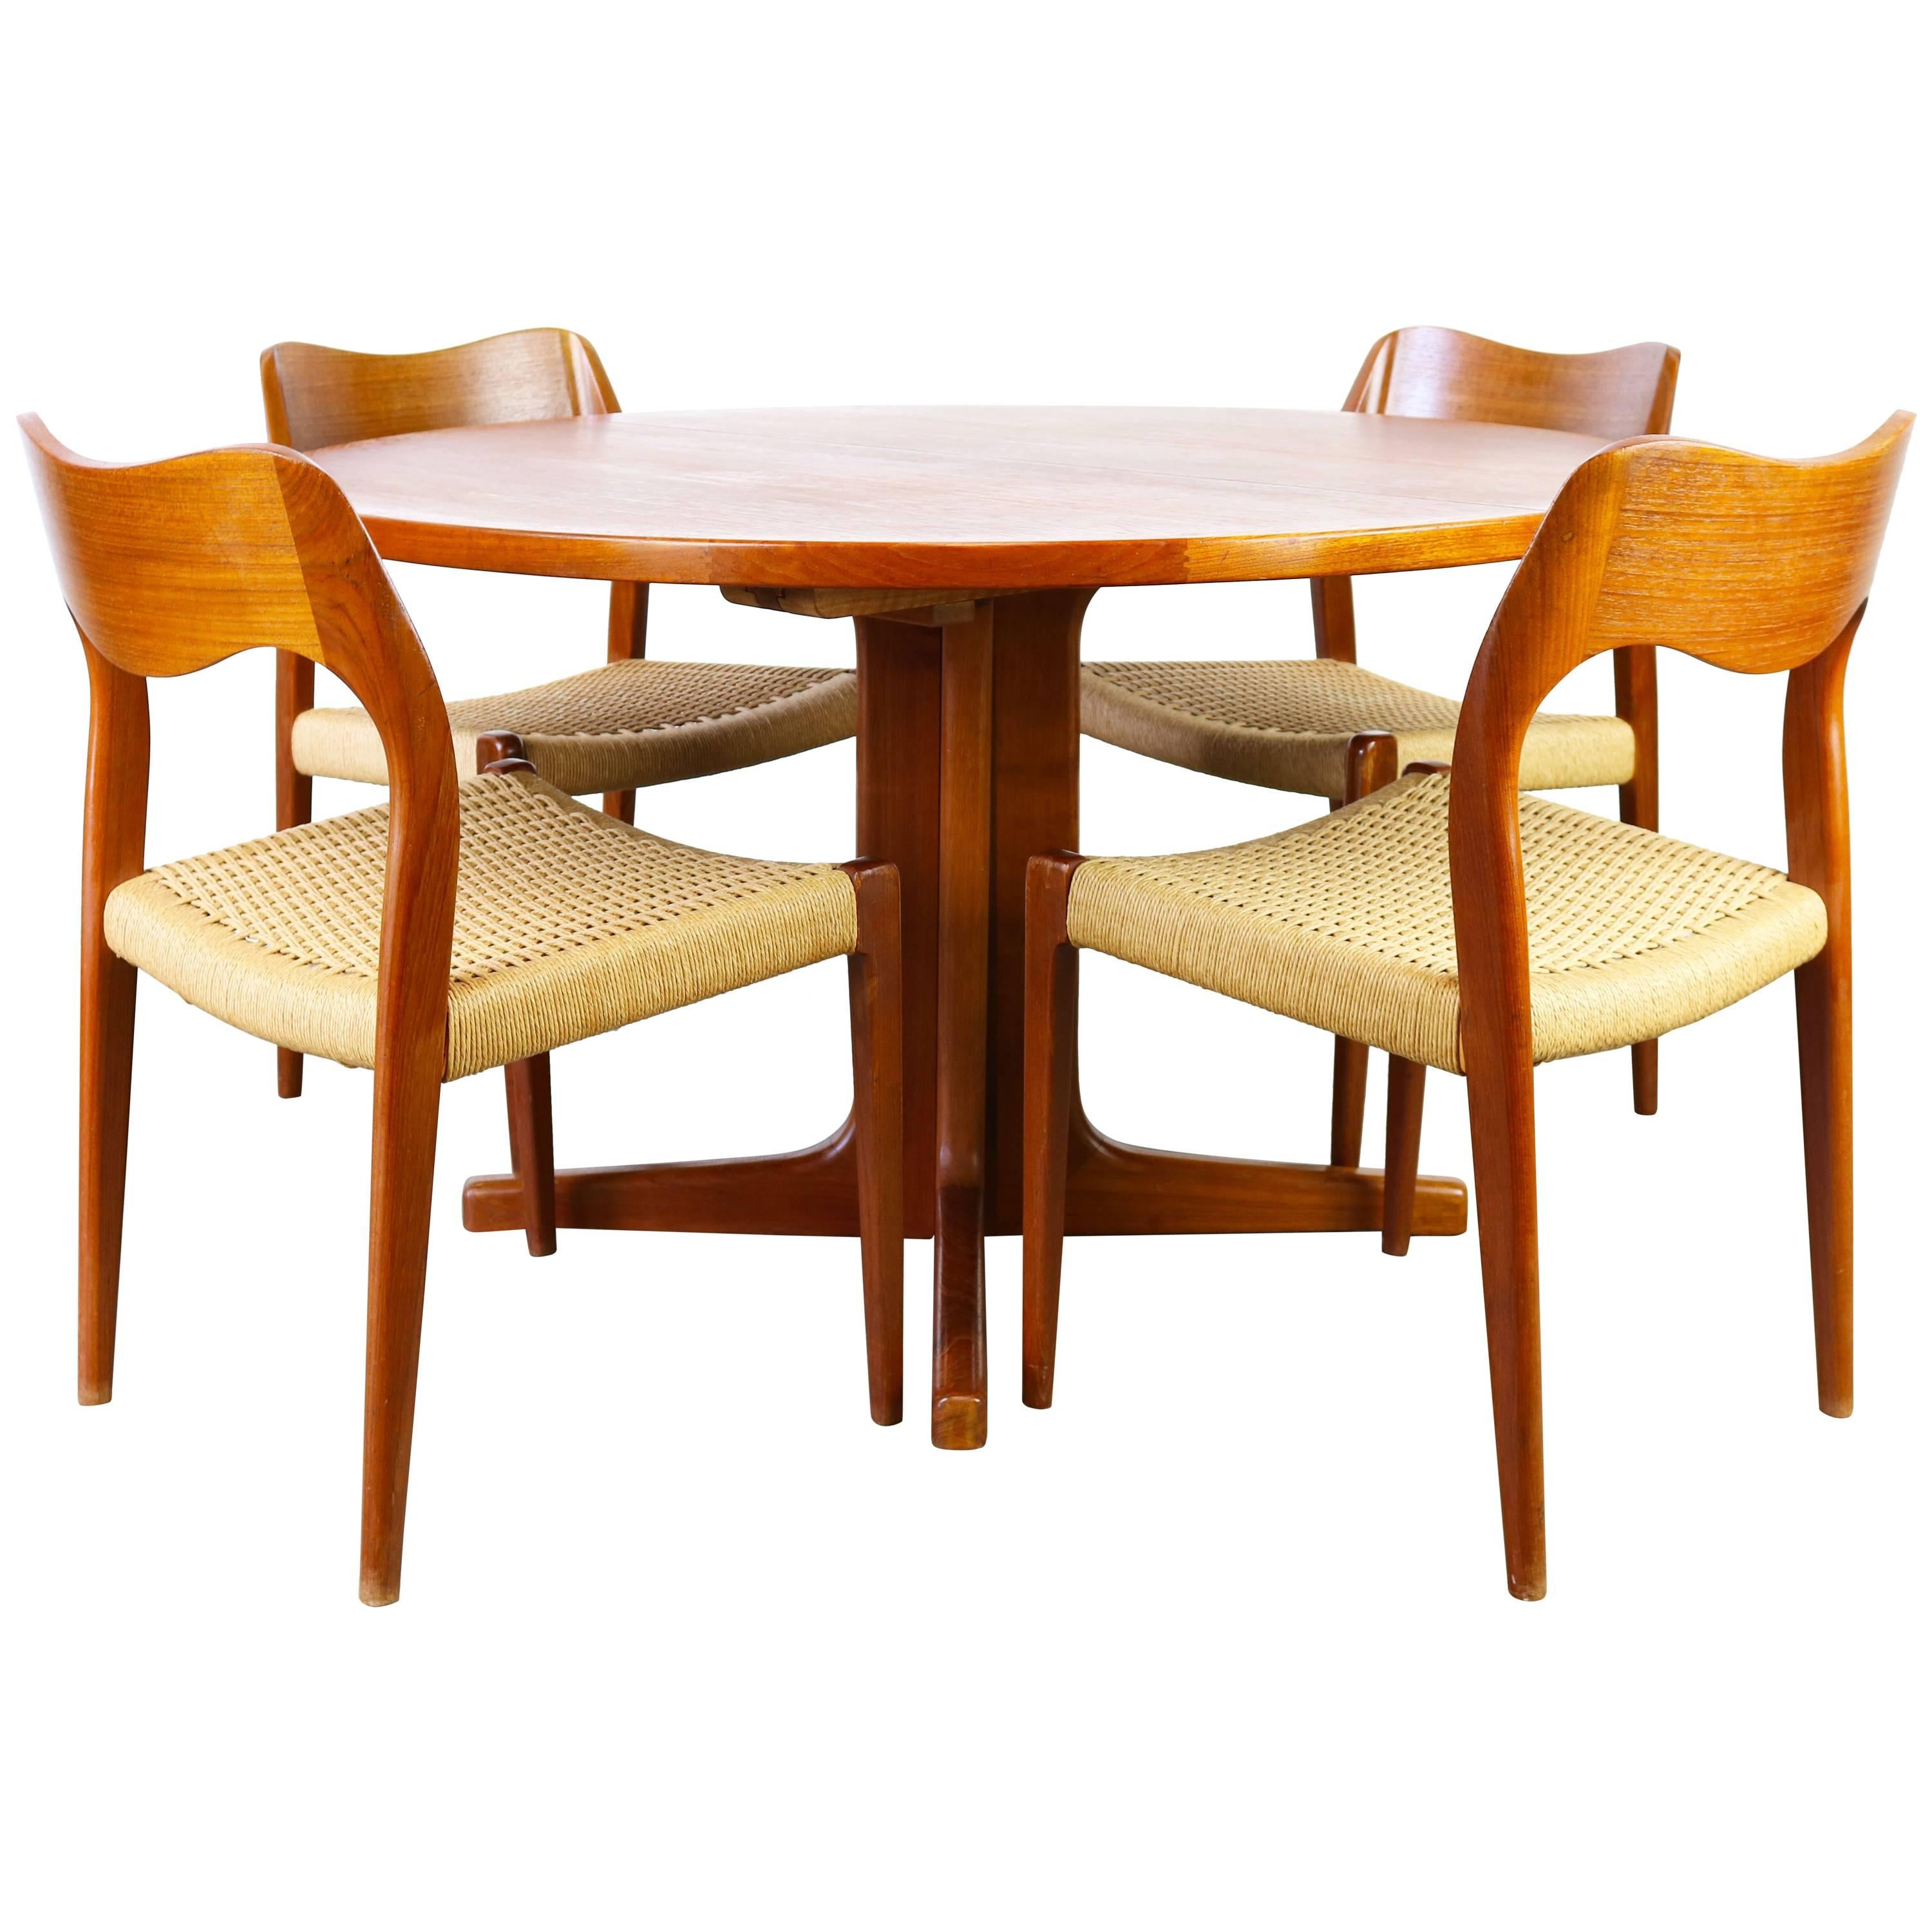 Danish Dining Room Set Model 71 Teak Papercord by Niels Otto Moller 1950 Brown